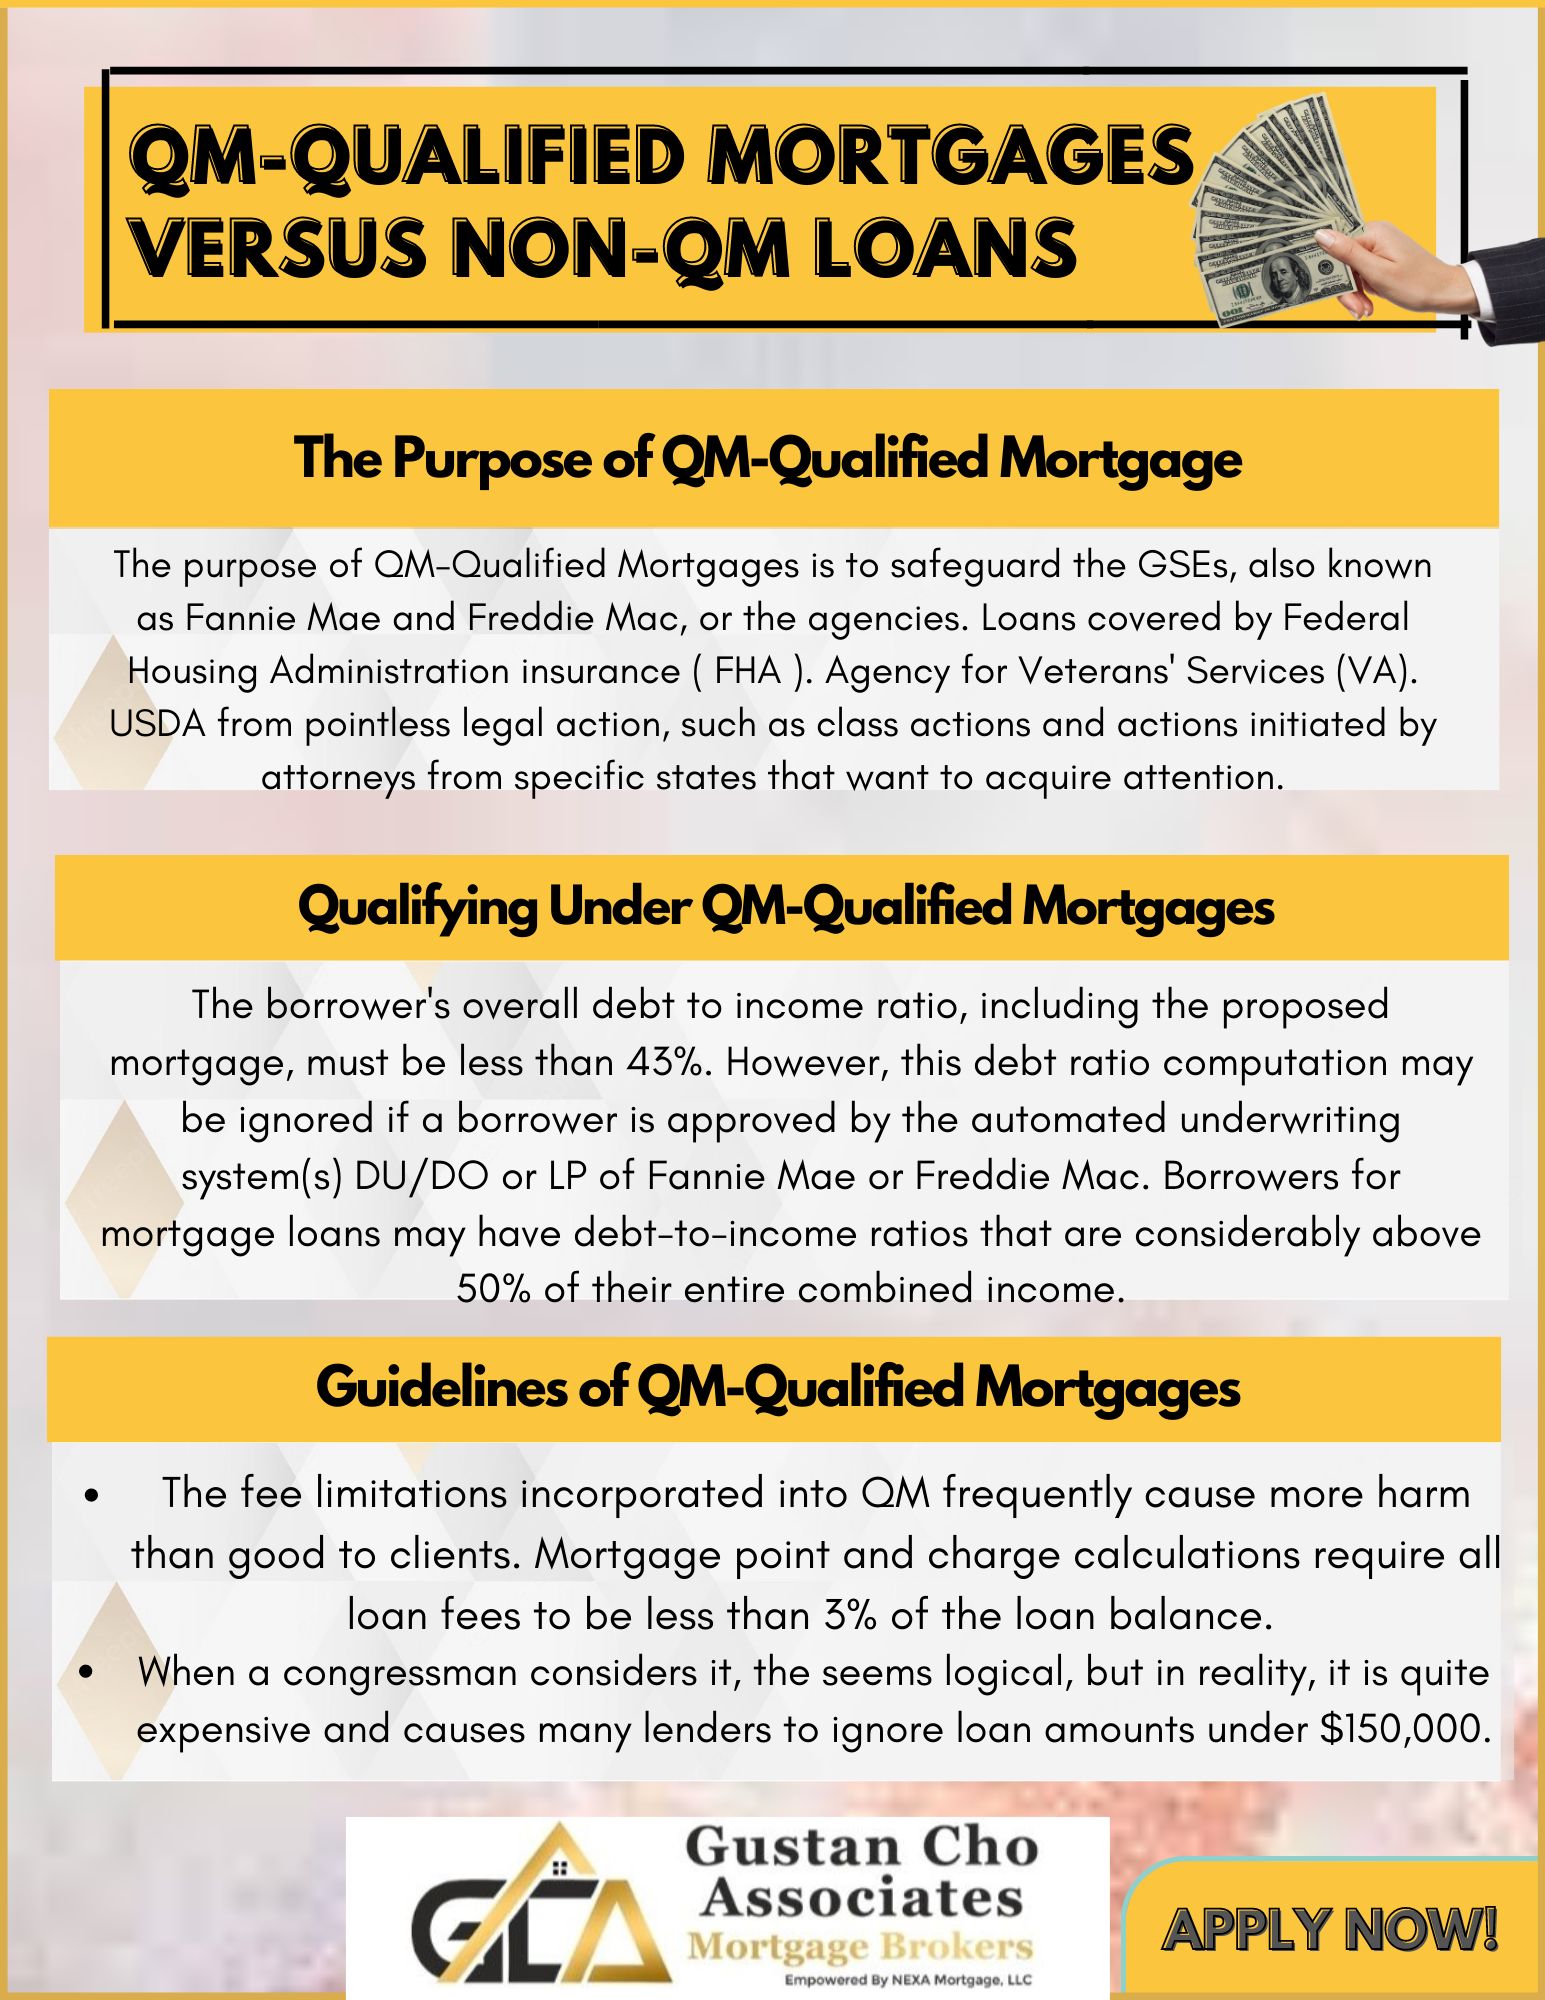 The Purpose of QM-Qualified Mortgage